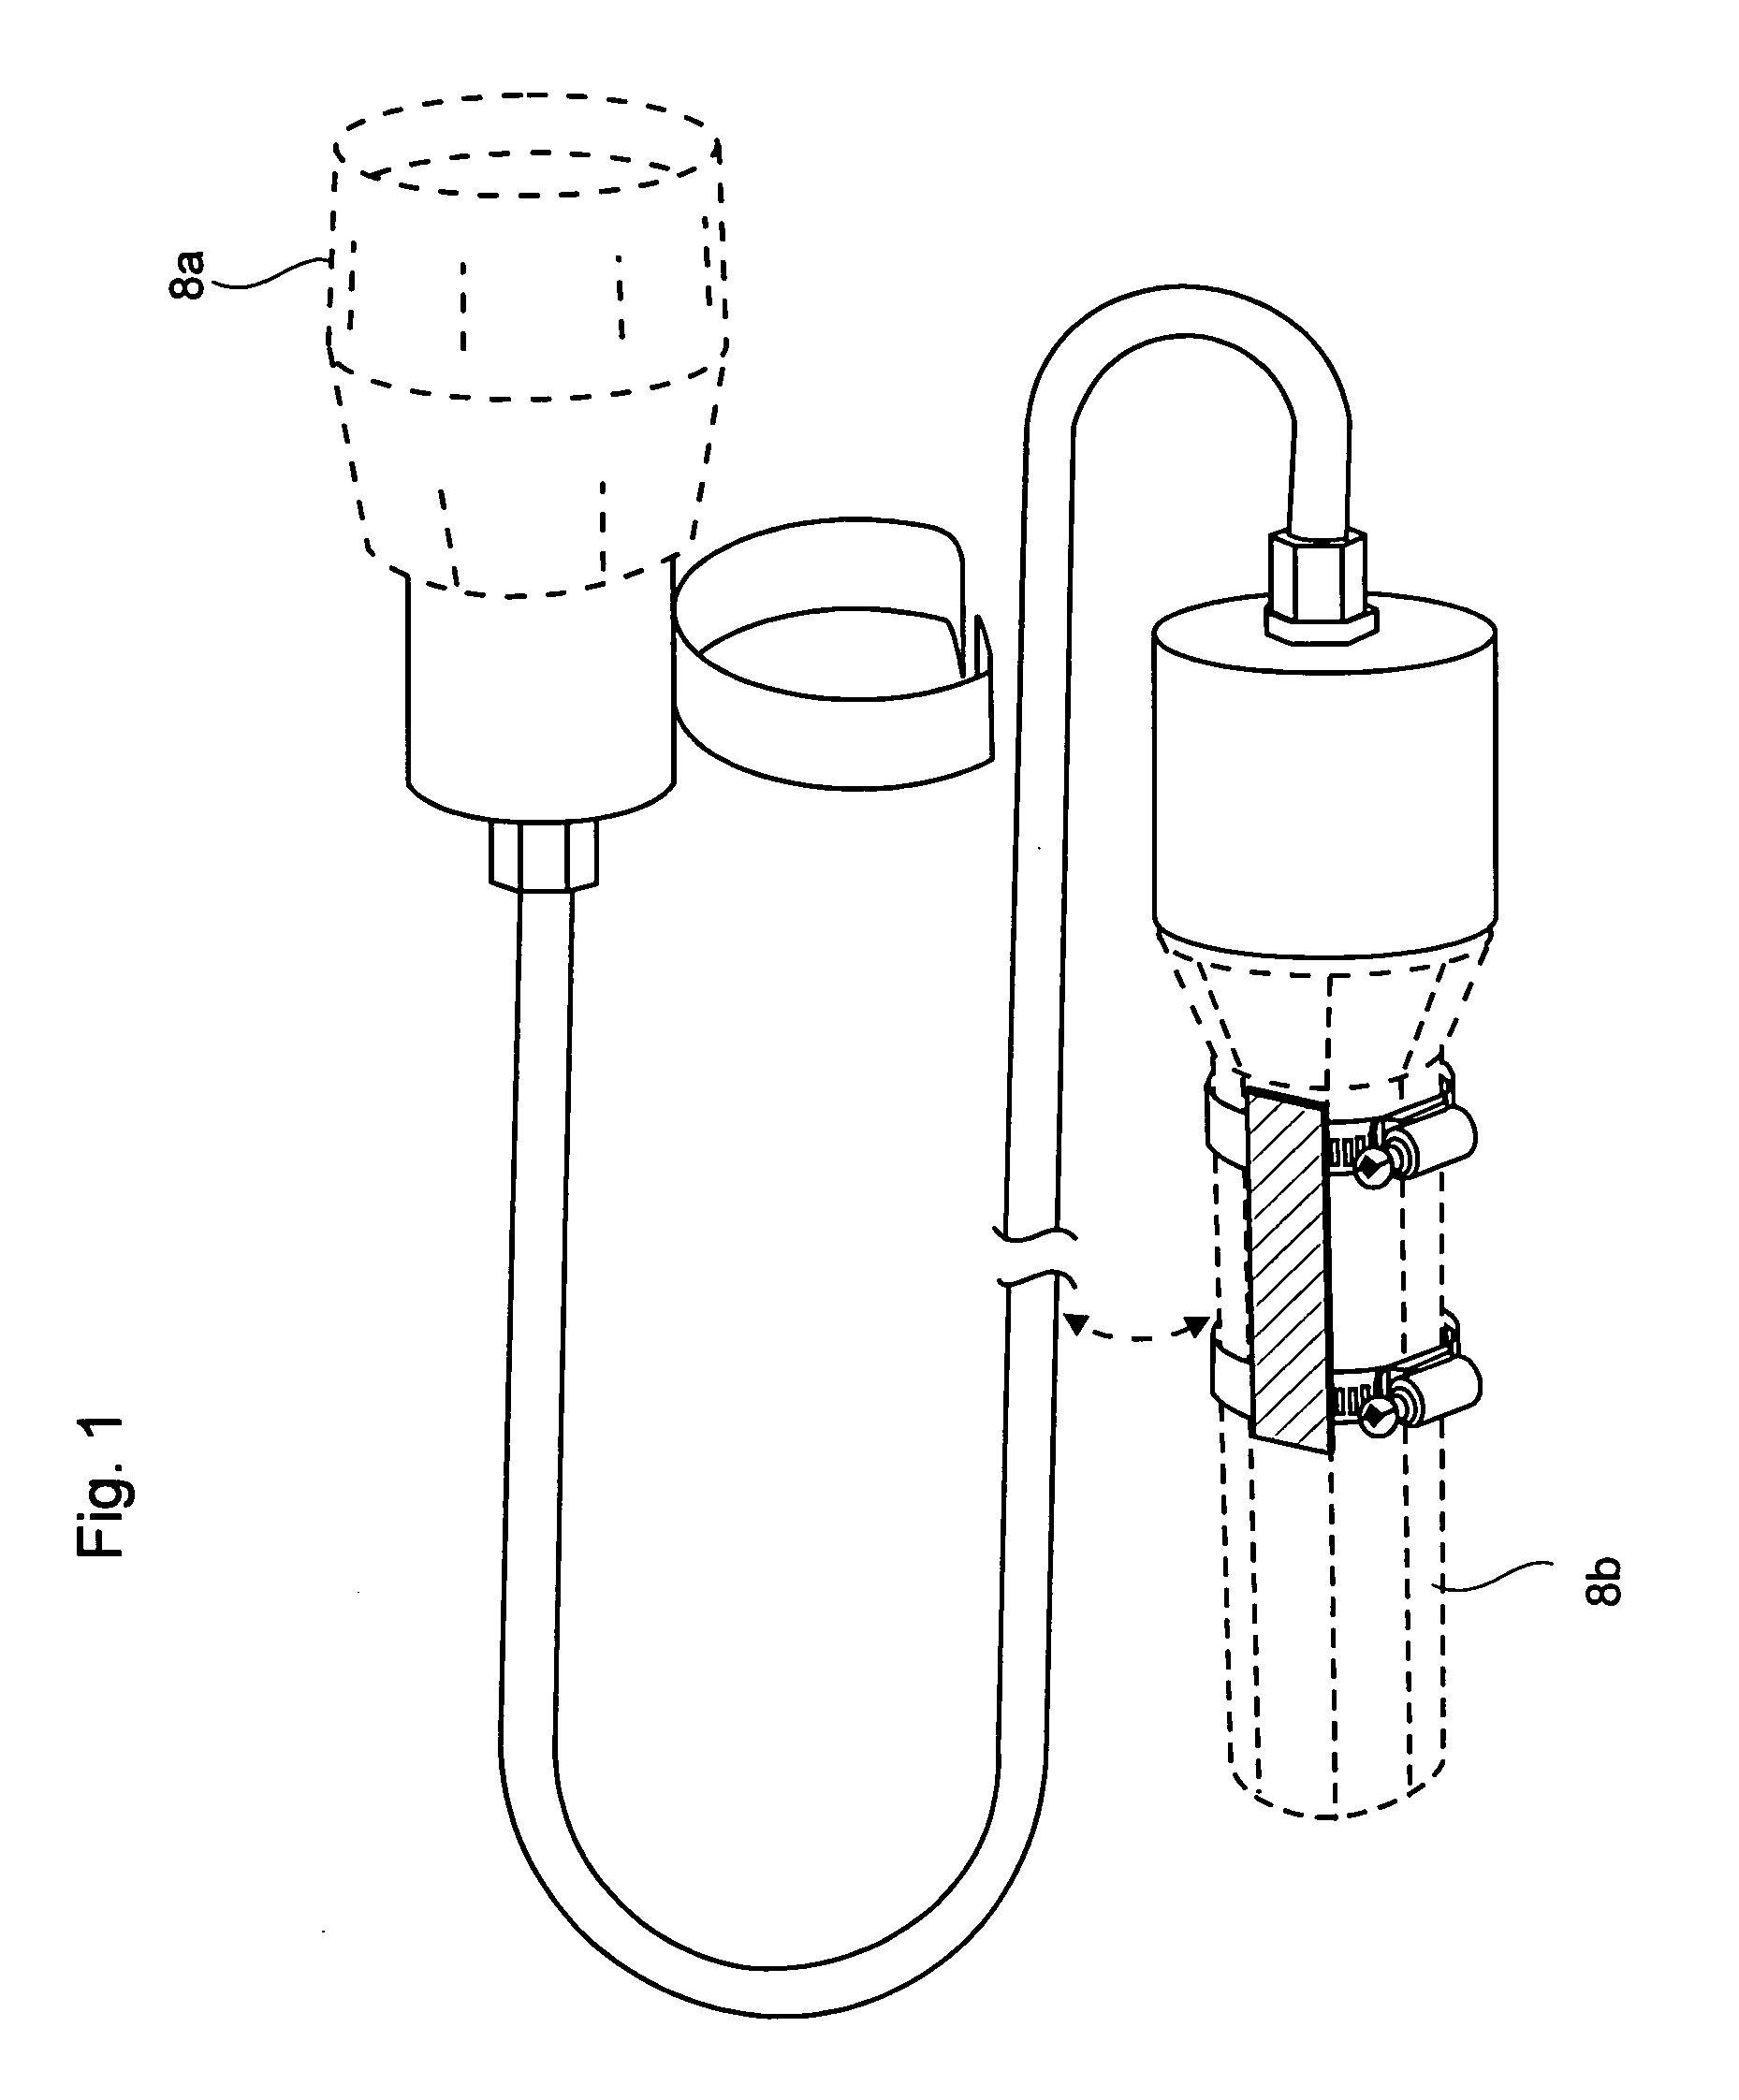 Apparatus for converting a dive light into a canister light